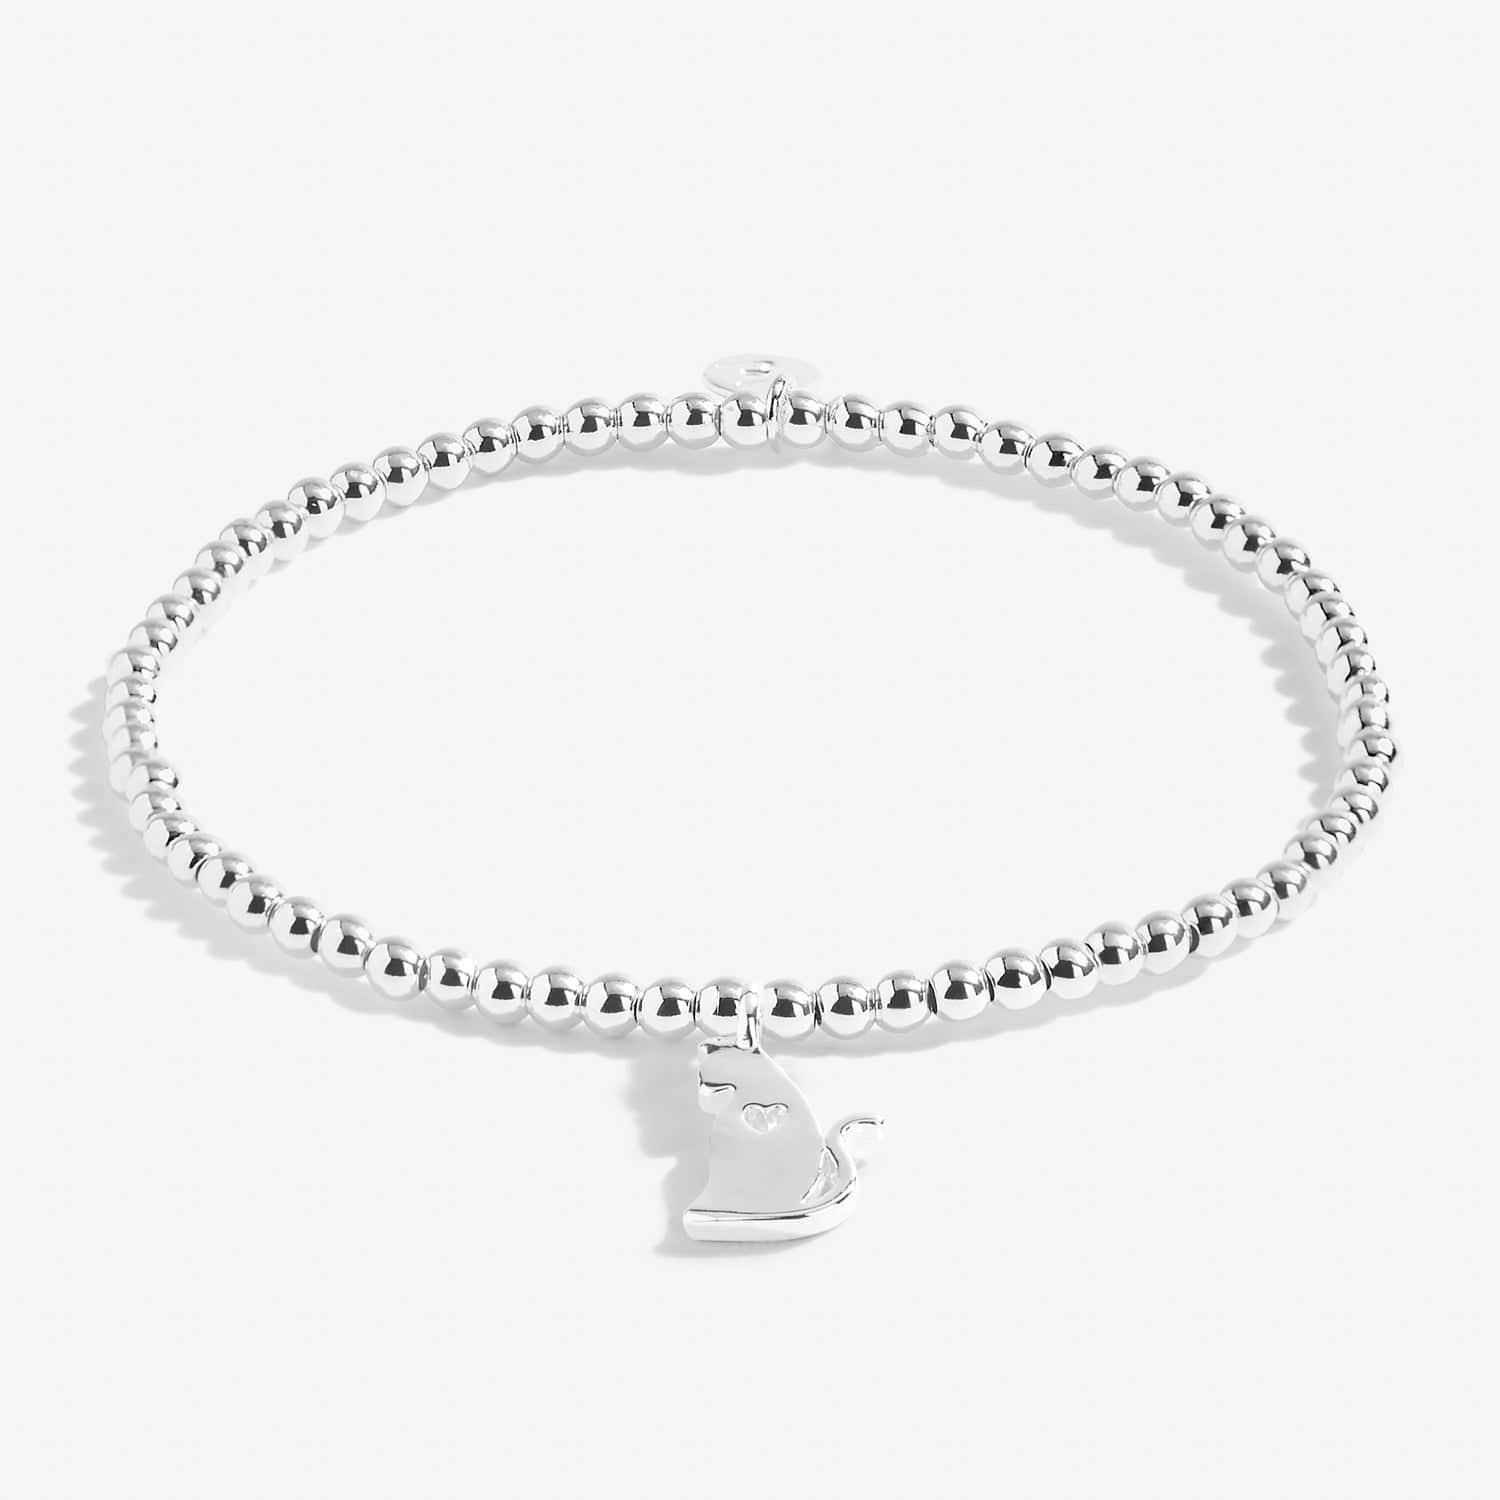 Joma Jewellery Bracelet Joma Jewellery Bracelet - A Little Life is Better with Cats